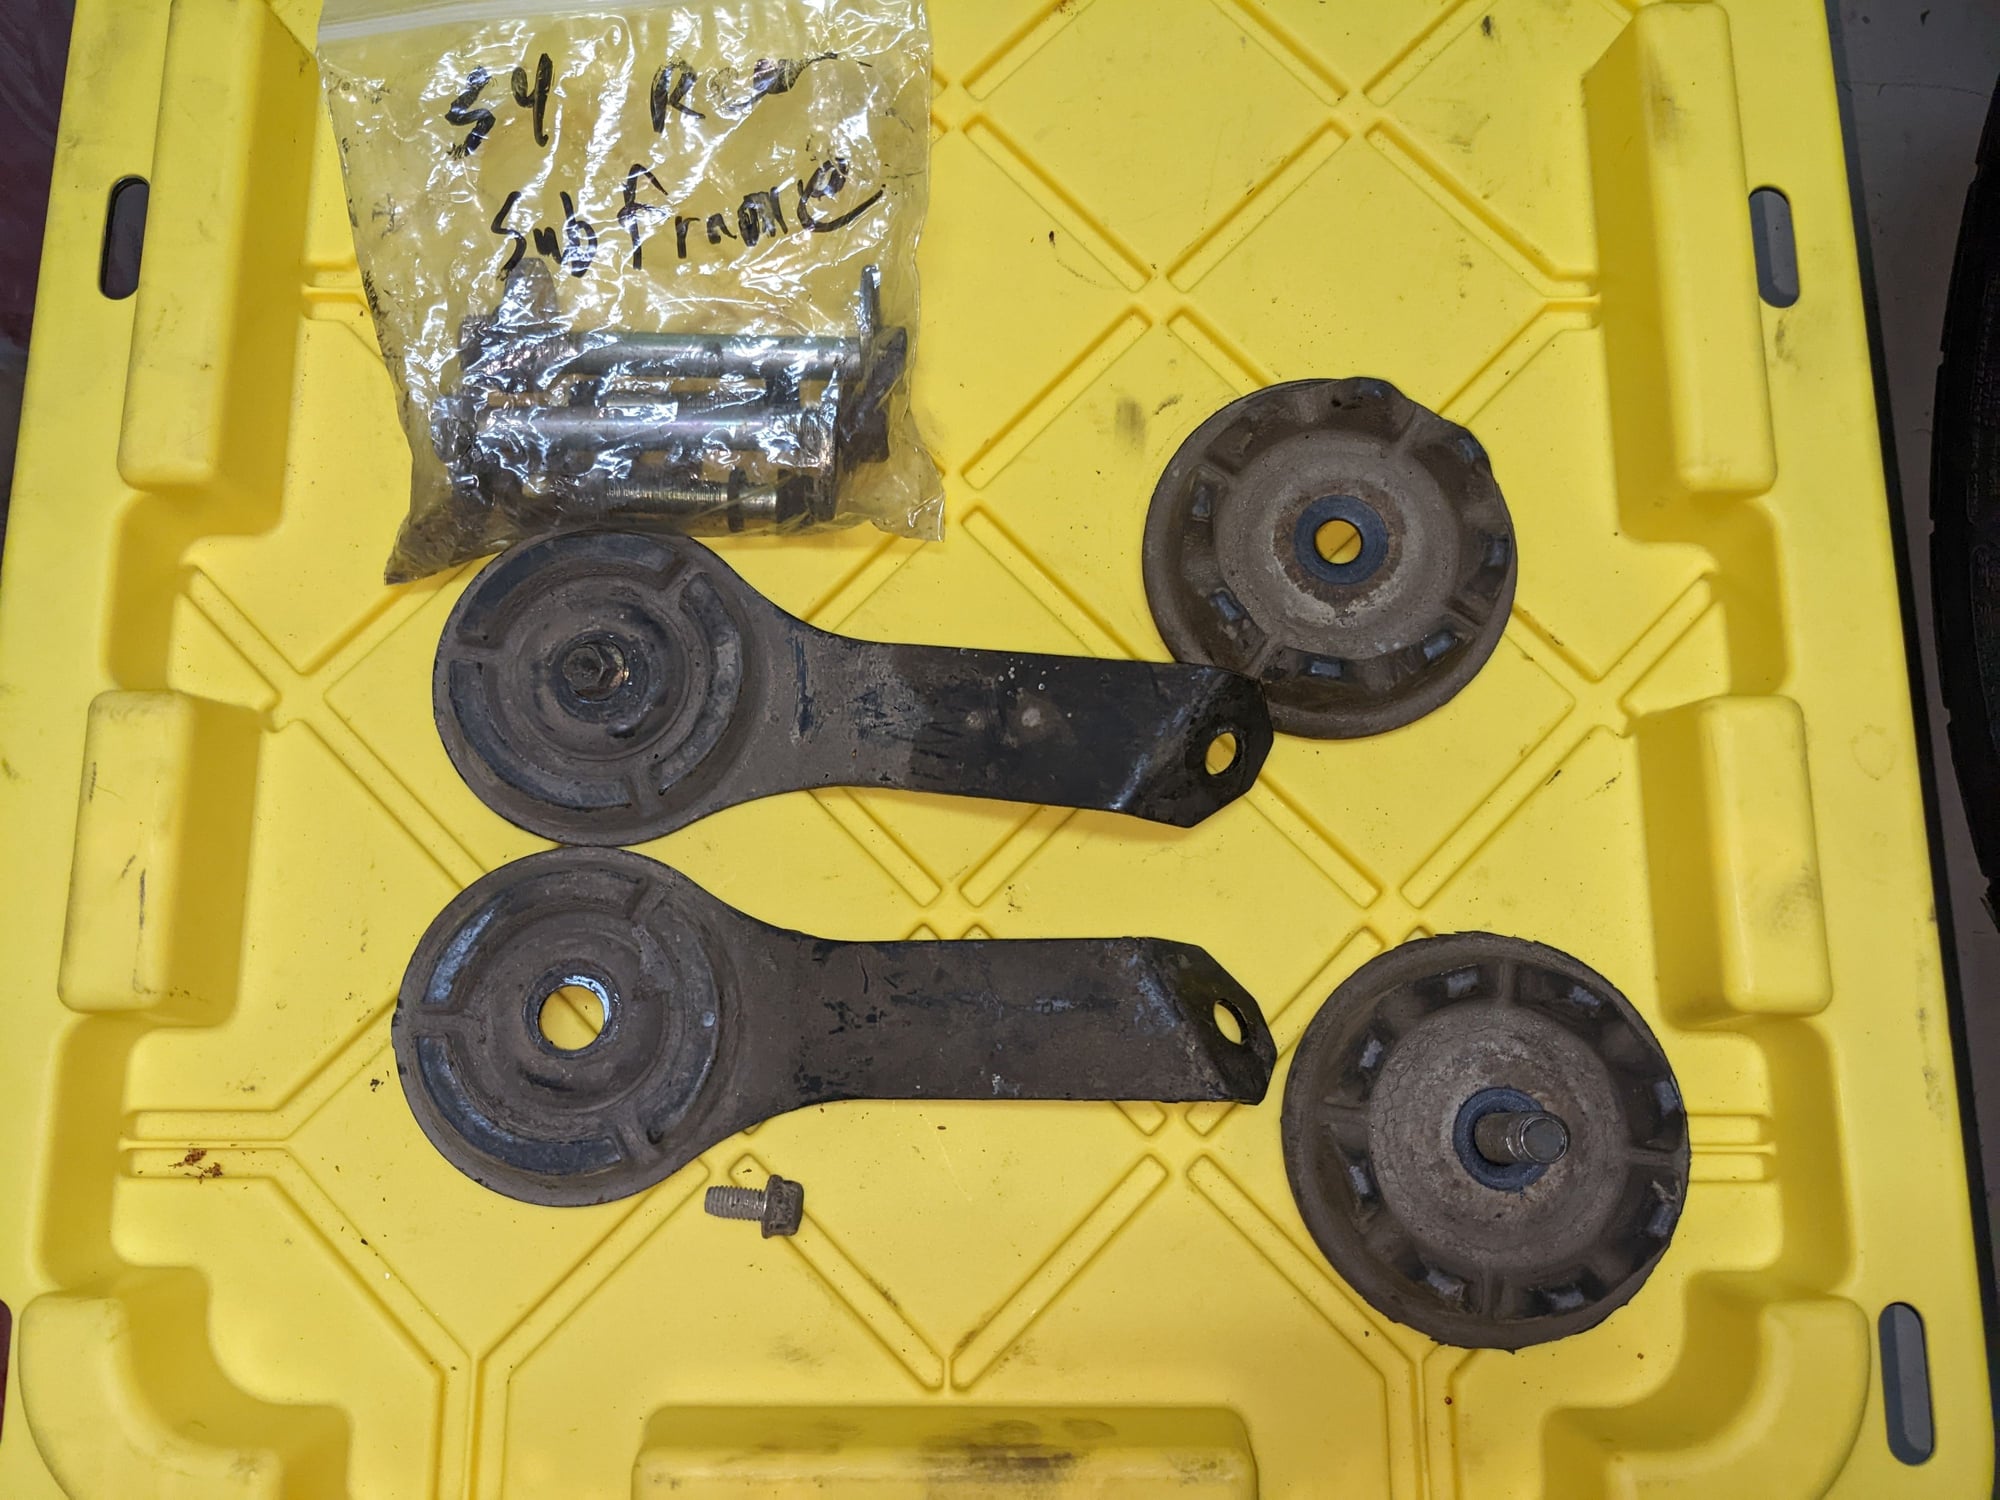 Drivetrain - 87 S4 T2 Rear Crossmember + Axles + Hubs + Rotors + Calipers +Extension Brackets - Used - 1986 to 1991 Mazda RX-7 - Chandler, AZ 85249, United States